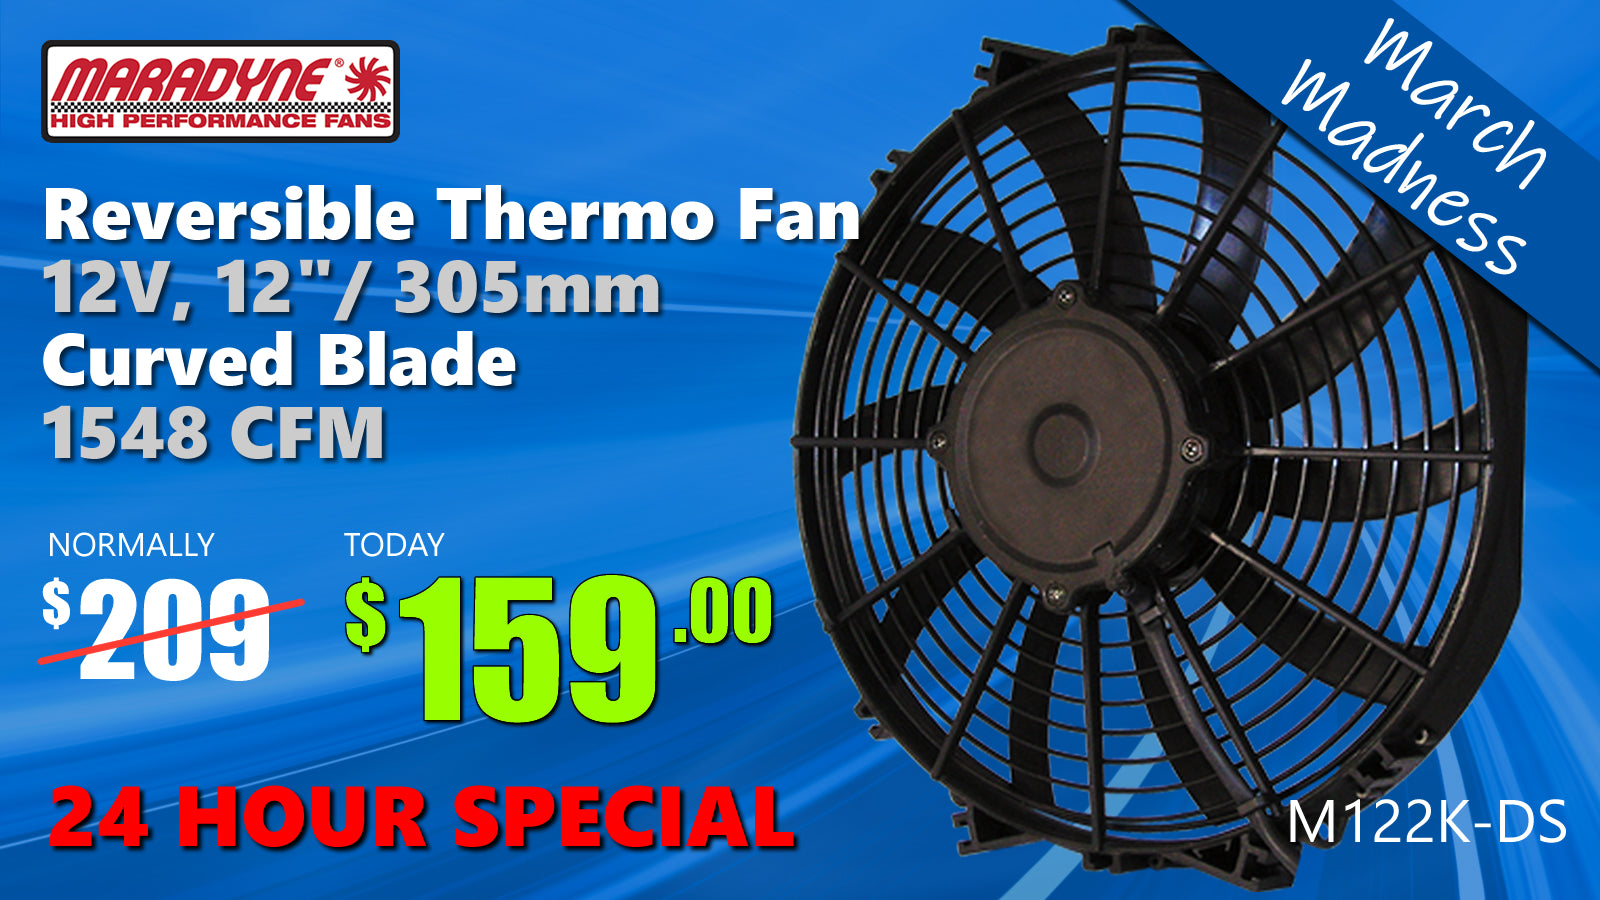 March Madness 24-Hour Special - Maradyne 12" Reversible Fan